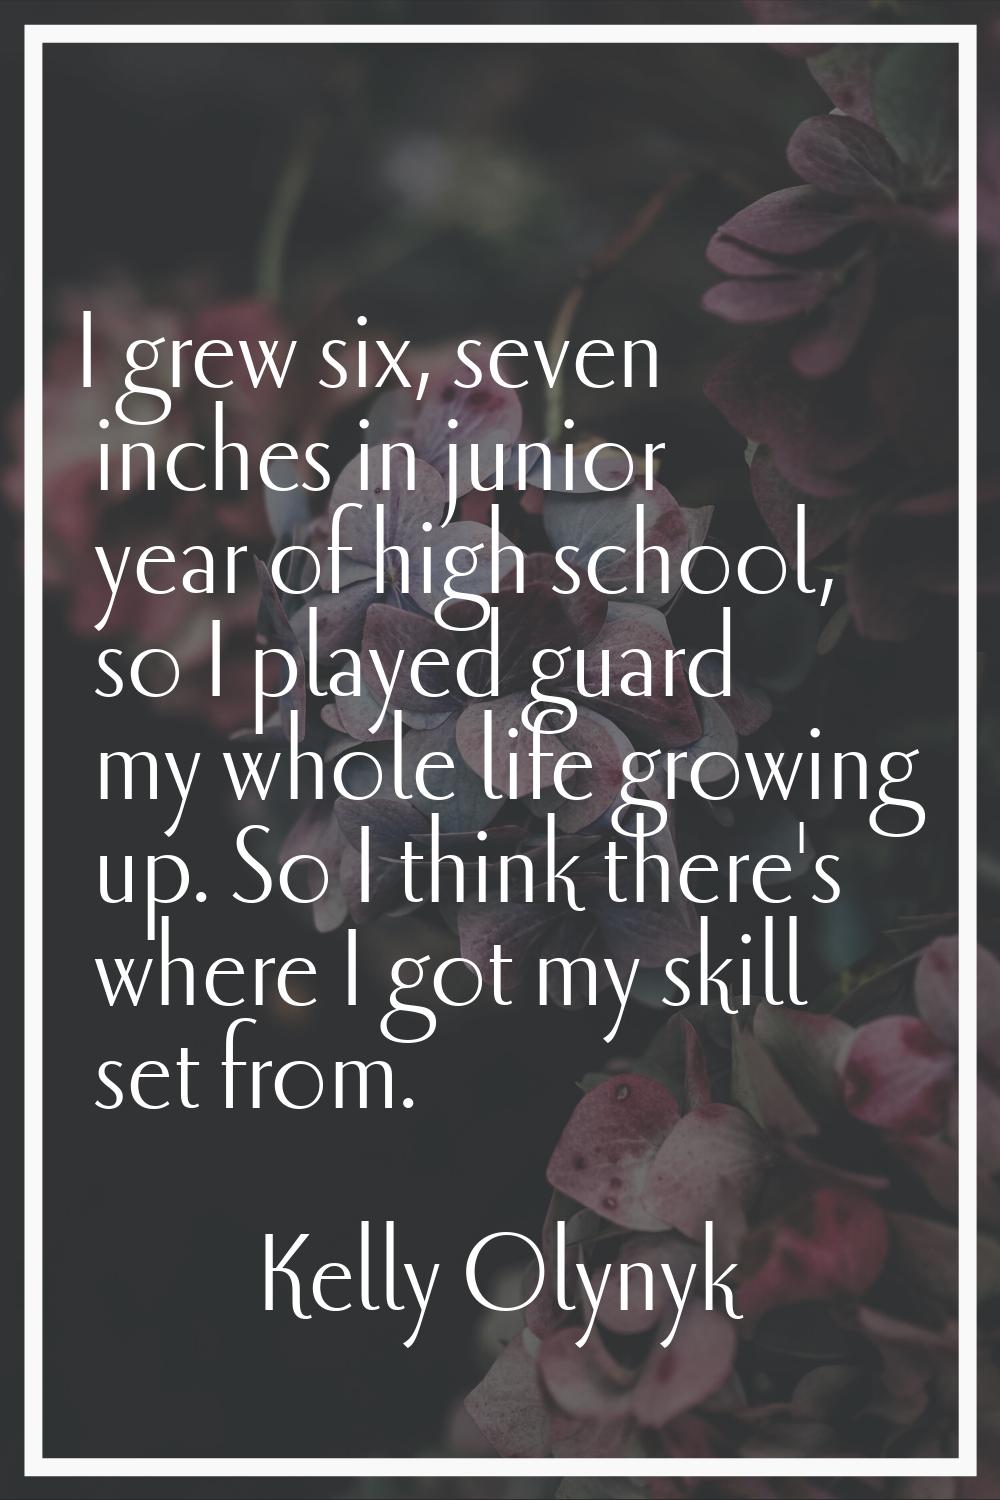 I grew six, seven inches in junior year of high school, so I played guard my whole life growing up.